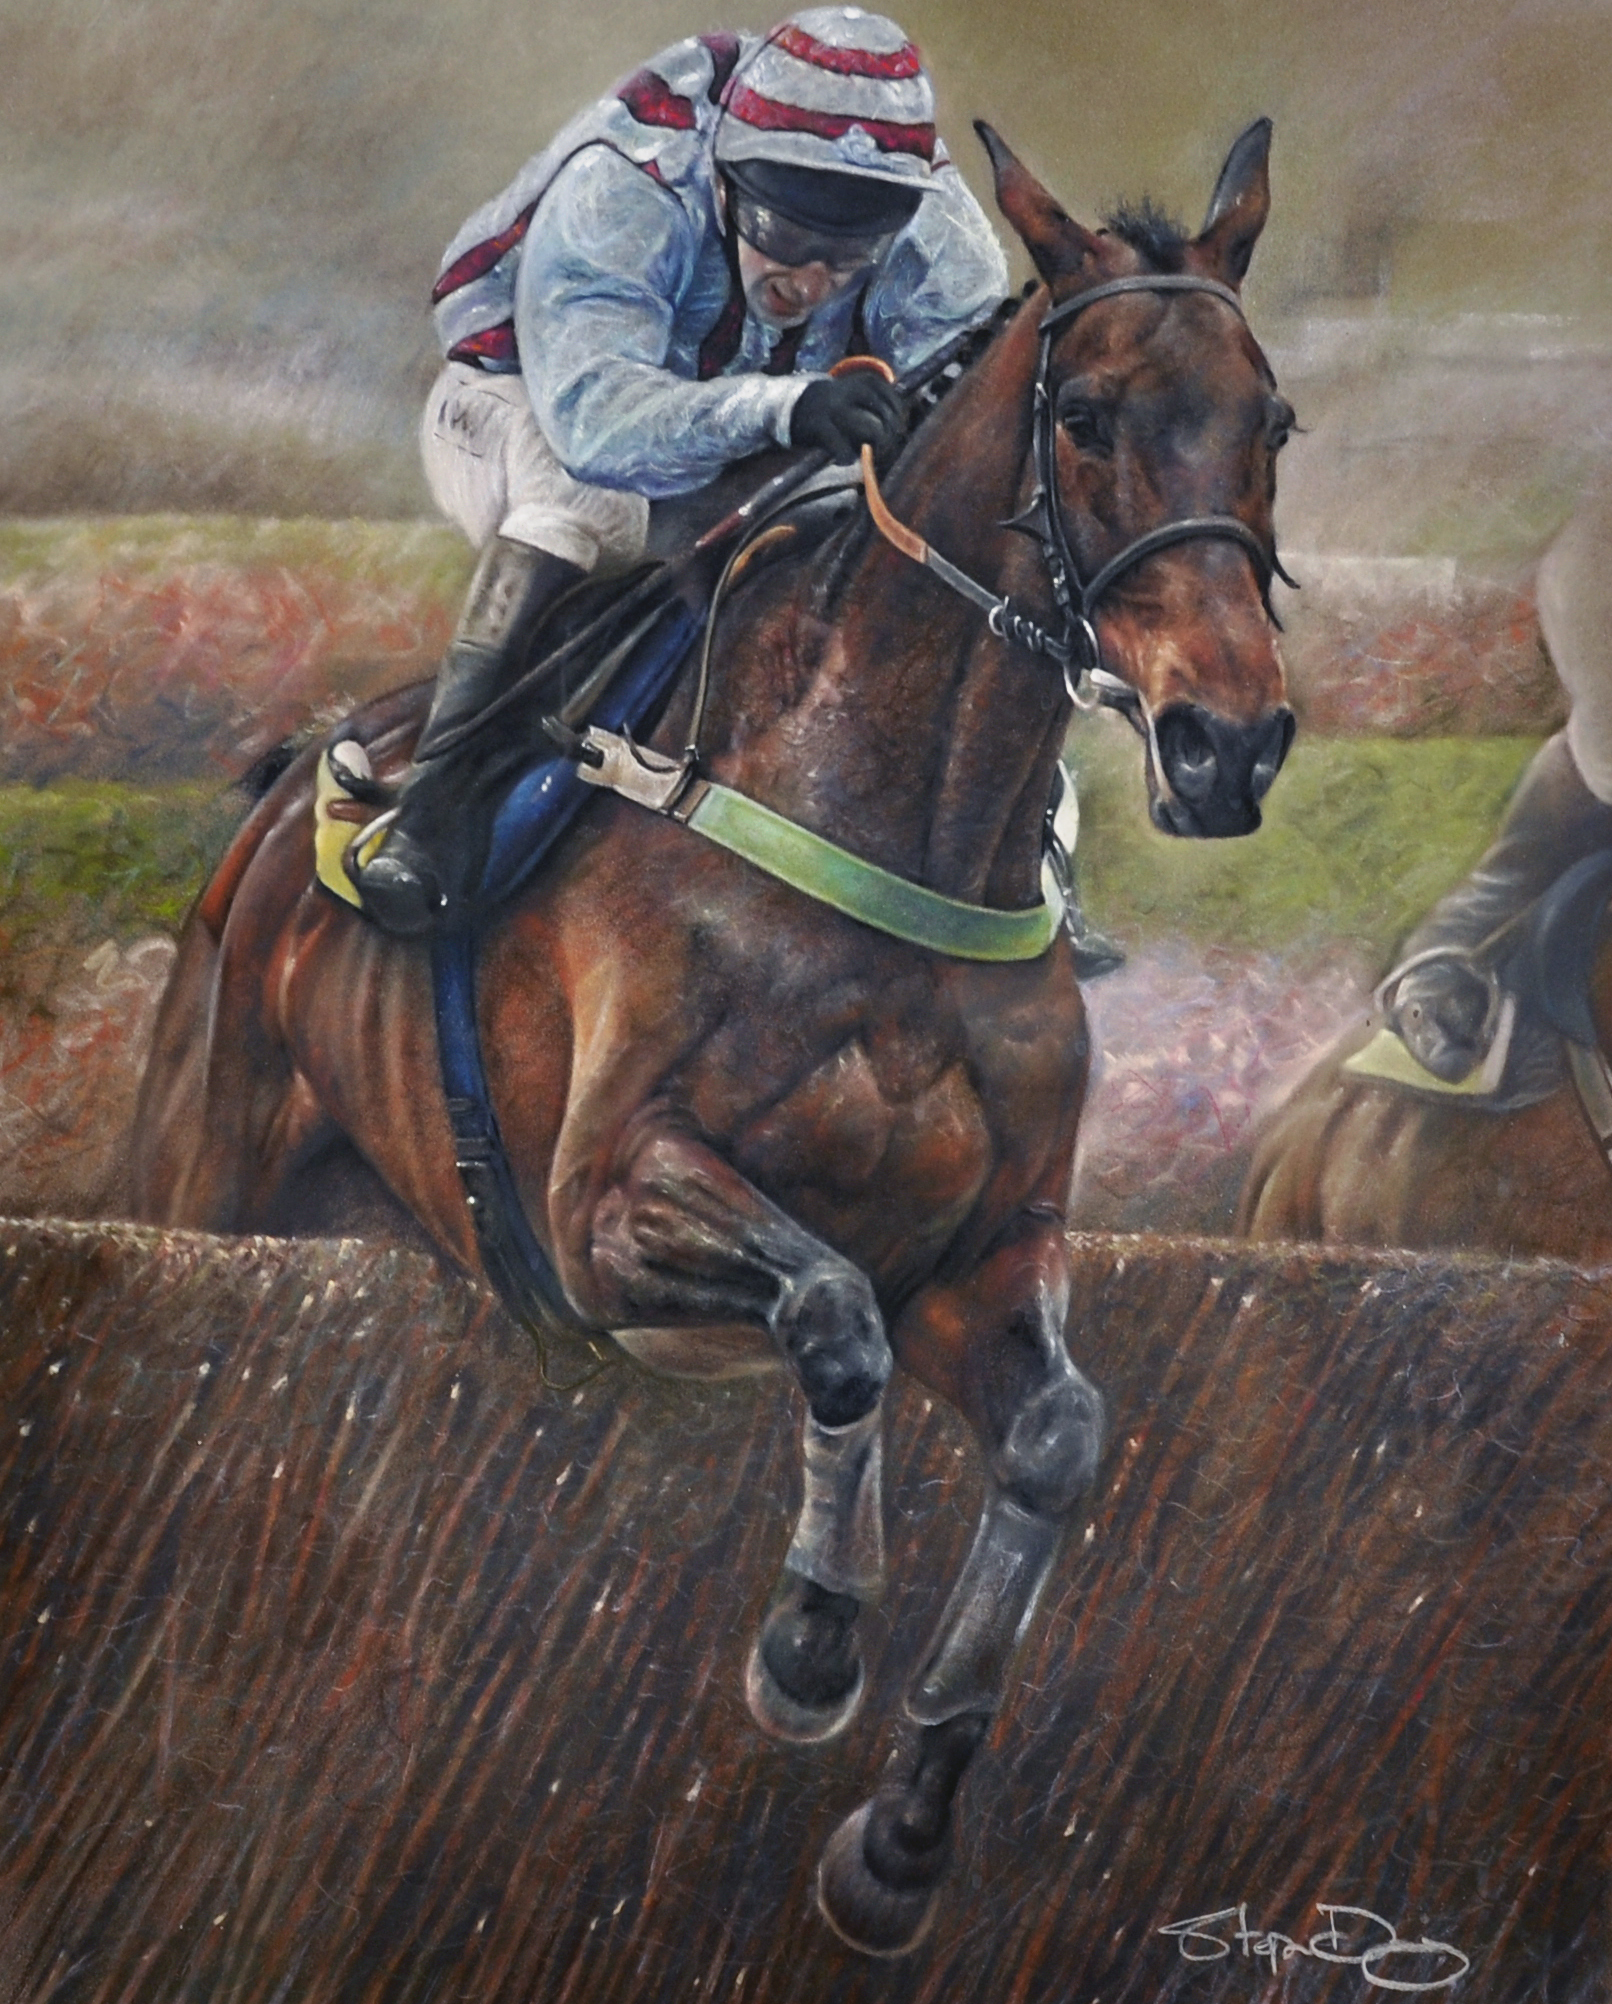 Stephen Doig (1964- ) British. "Best Mate", Taking a Fence, Pastel, Signed, 22" x 18".